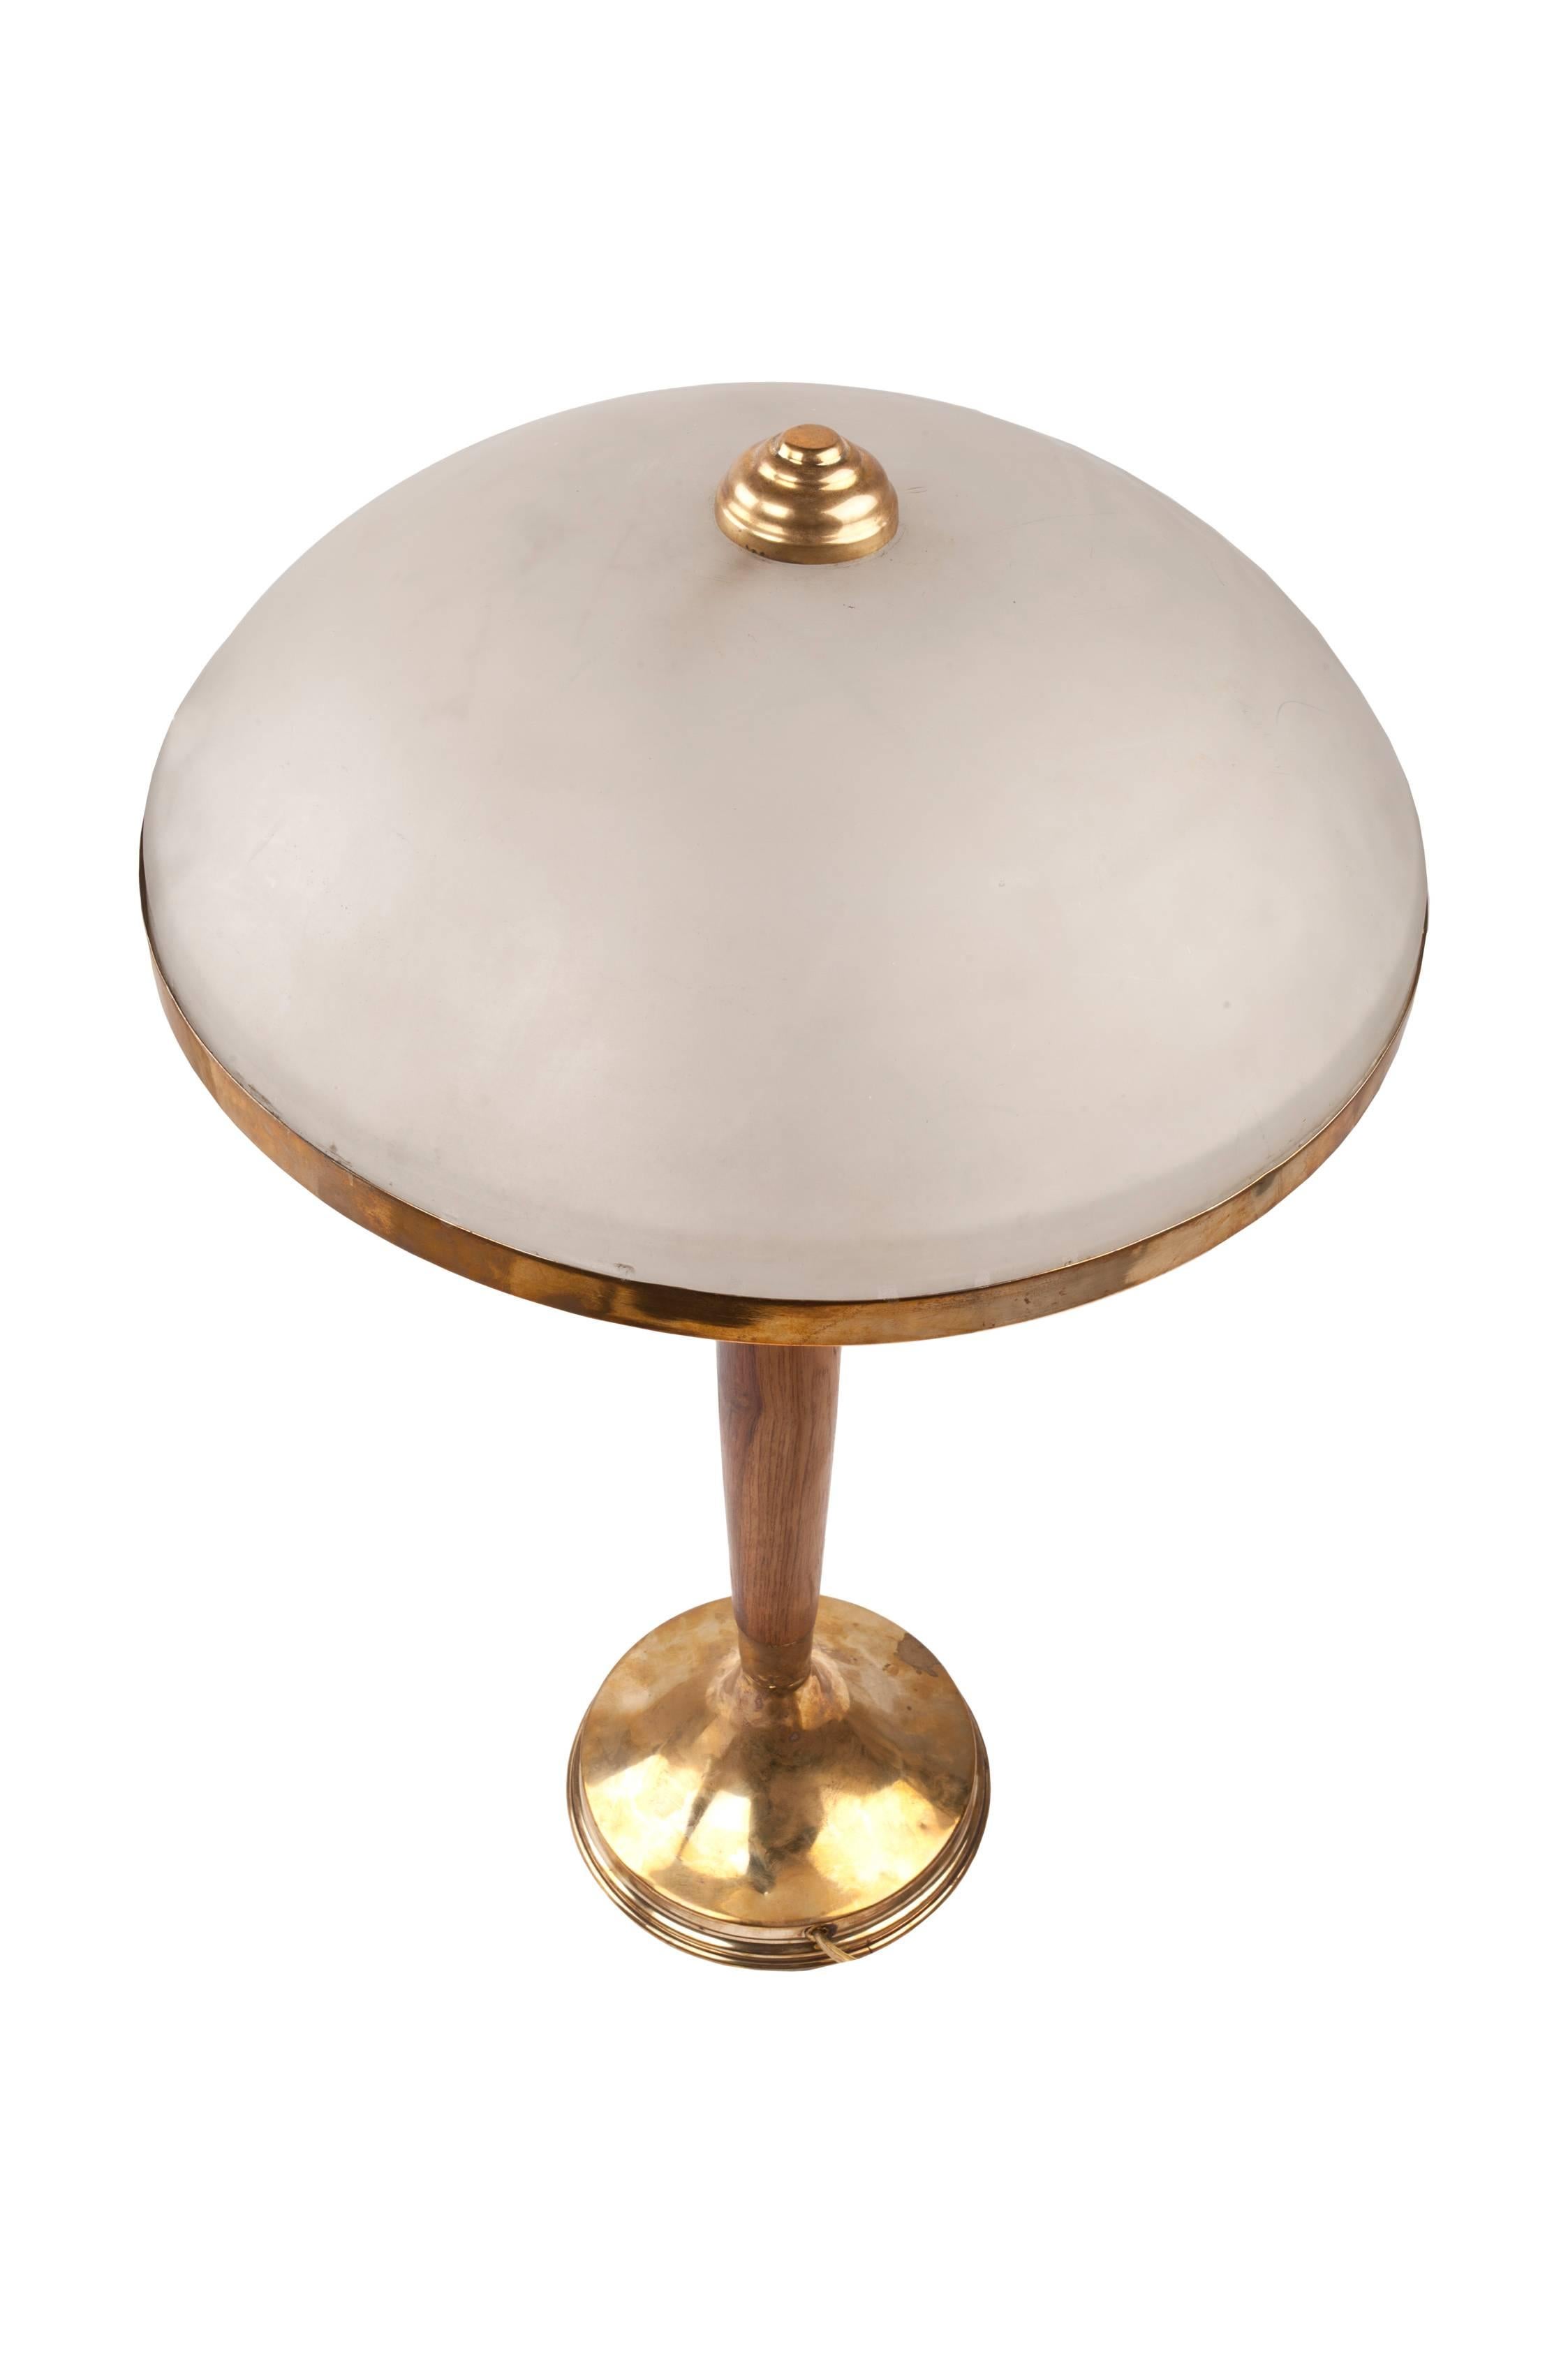 Elegant teak and brass table lamp with opaque glass shade. Originally European, this takes an E-14 bulb base, and those are easy to find. Rewired for American use. Mid-Century Modern. Base measures 7 inches, shade height is 5 inches, and stem is